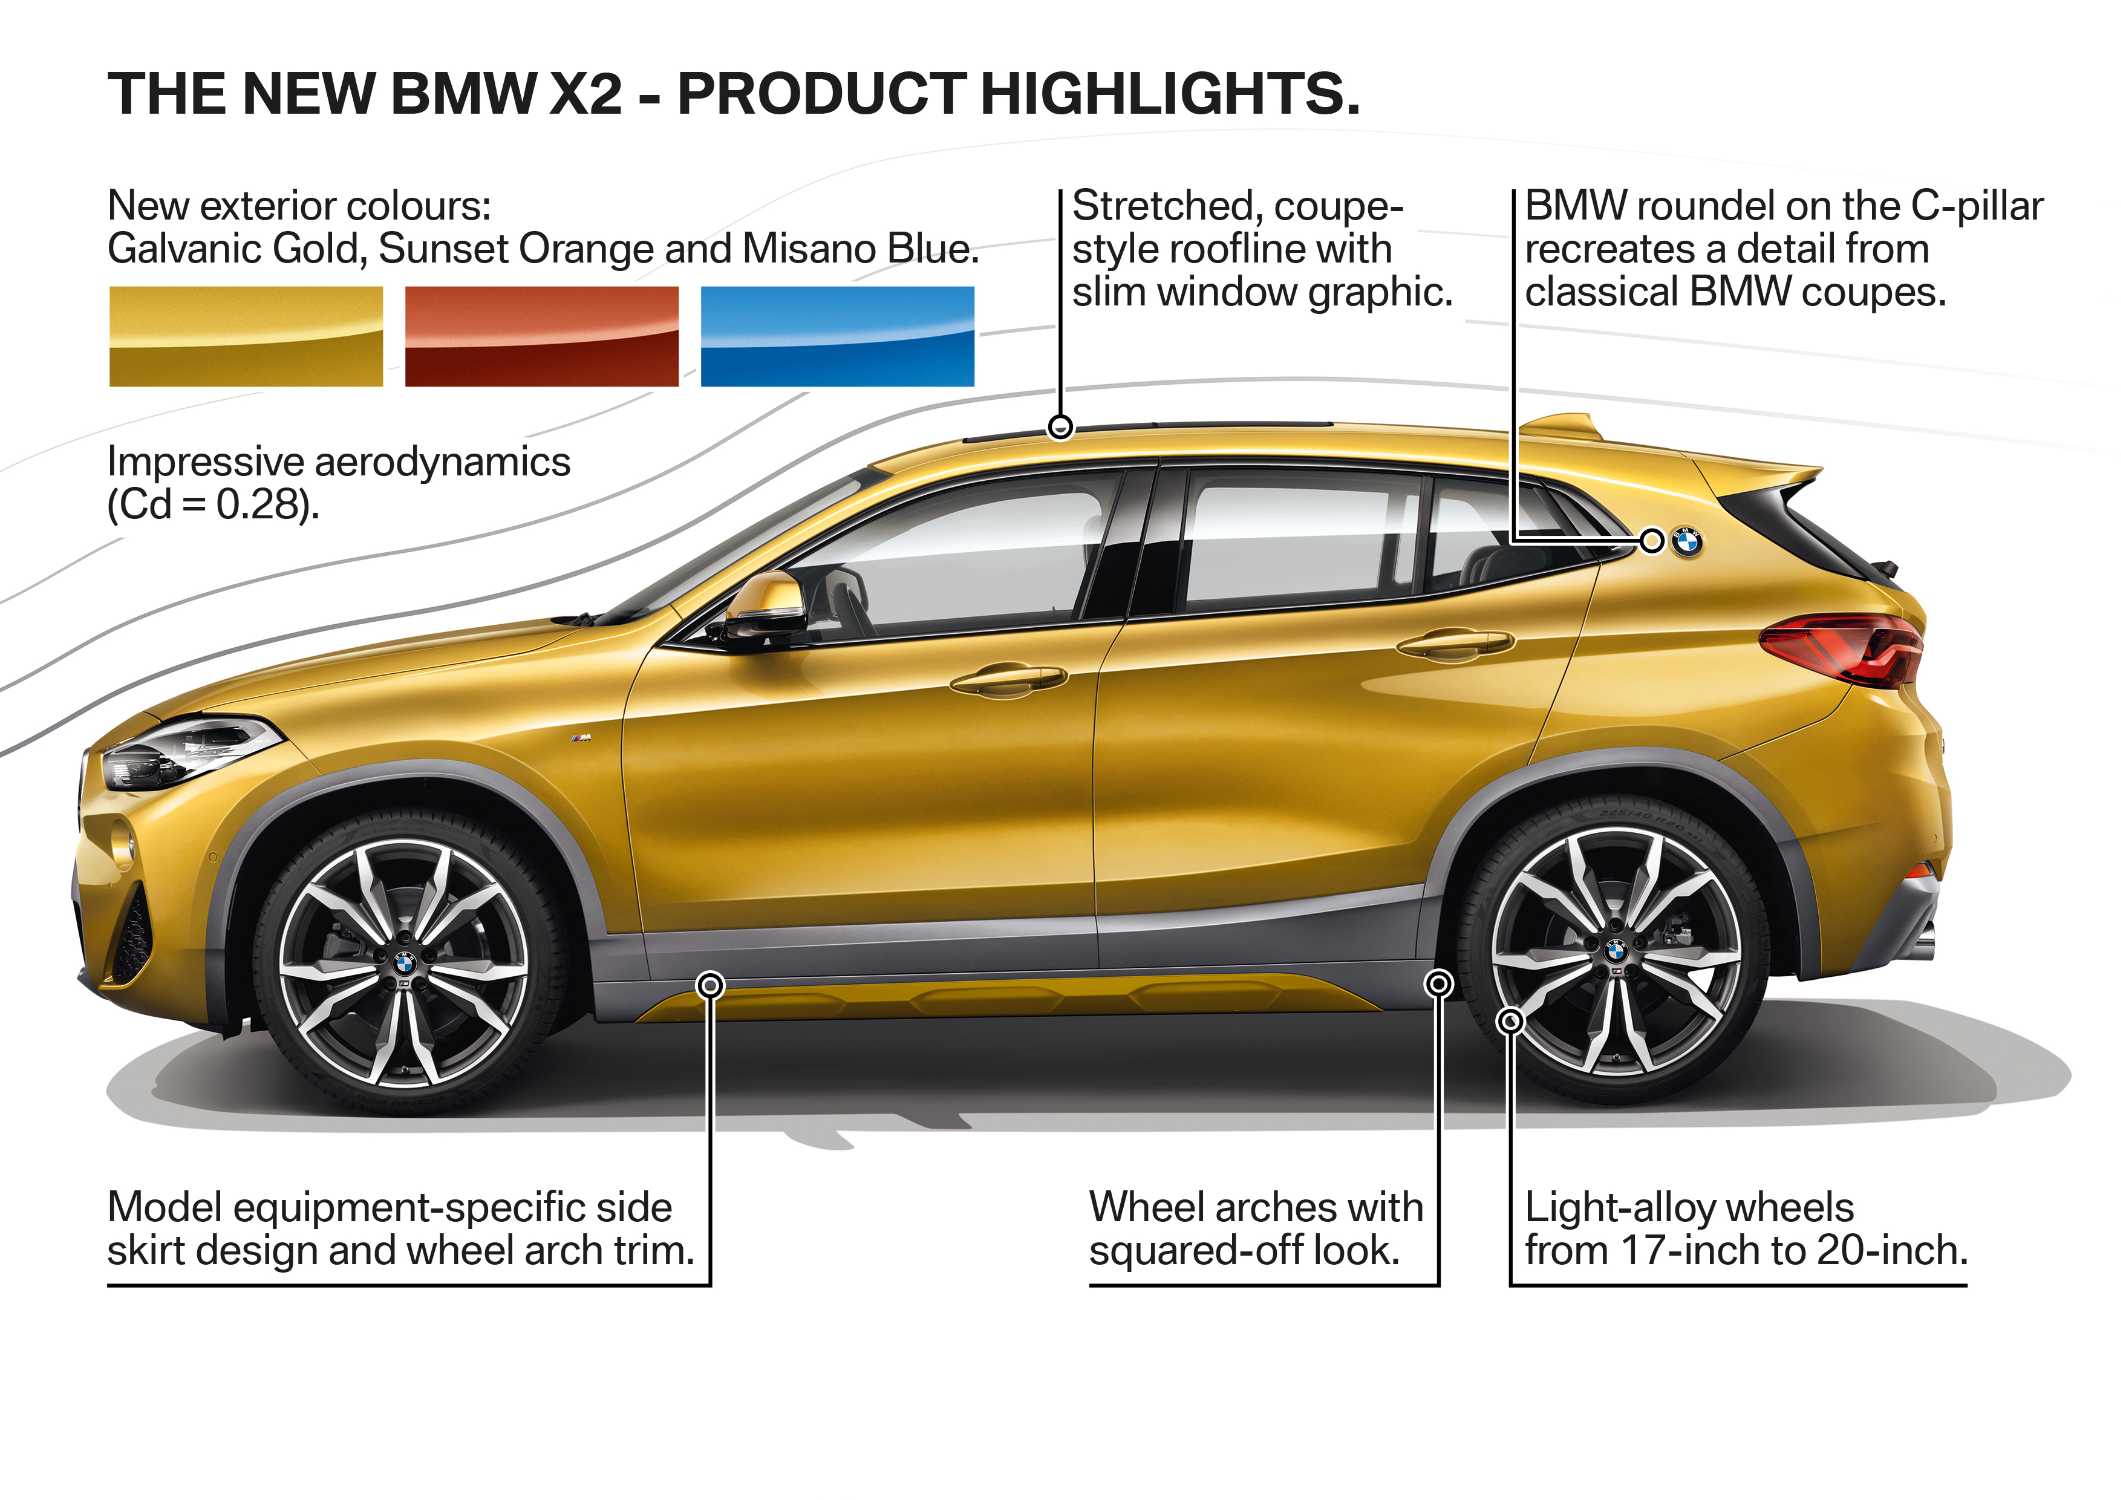 The brand new BMW X2 - Product Highlights (10/2017).